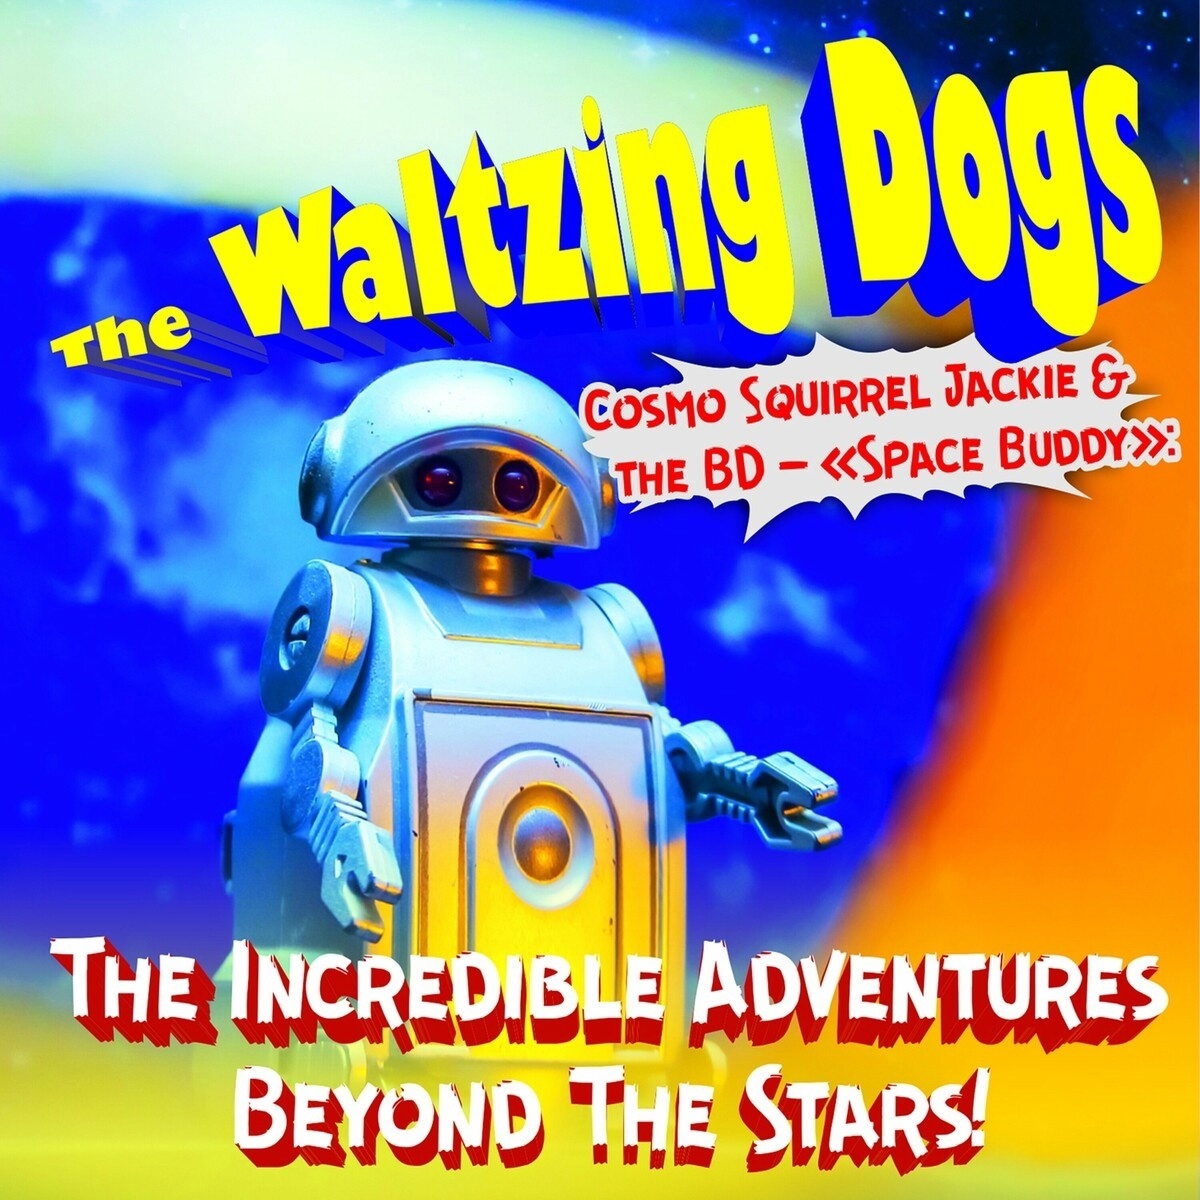 The Waltzing Dogs — The Incredible Adventures Beyond the Stars!